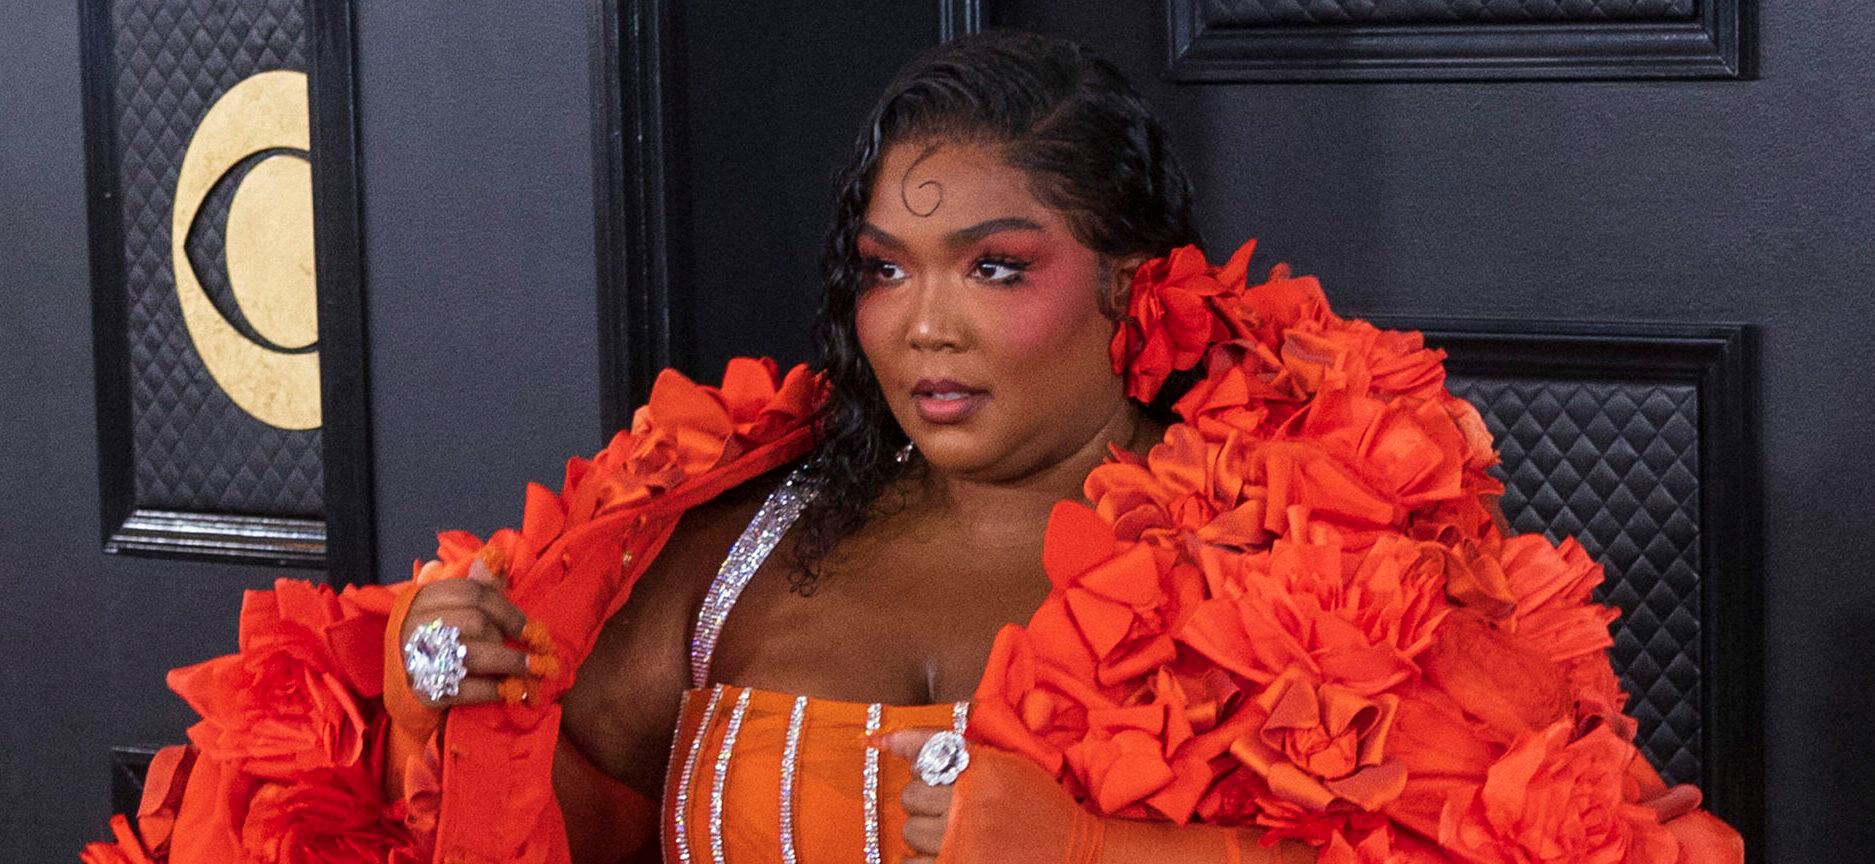 Here’s What Lizzo Thinks About Victoria’s Secret’s Comeback After Four Years